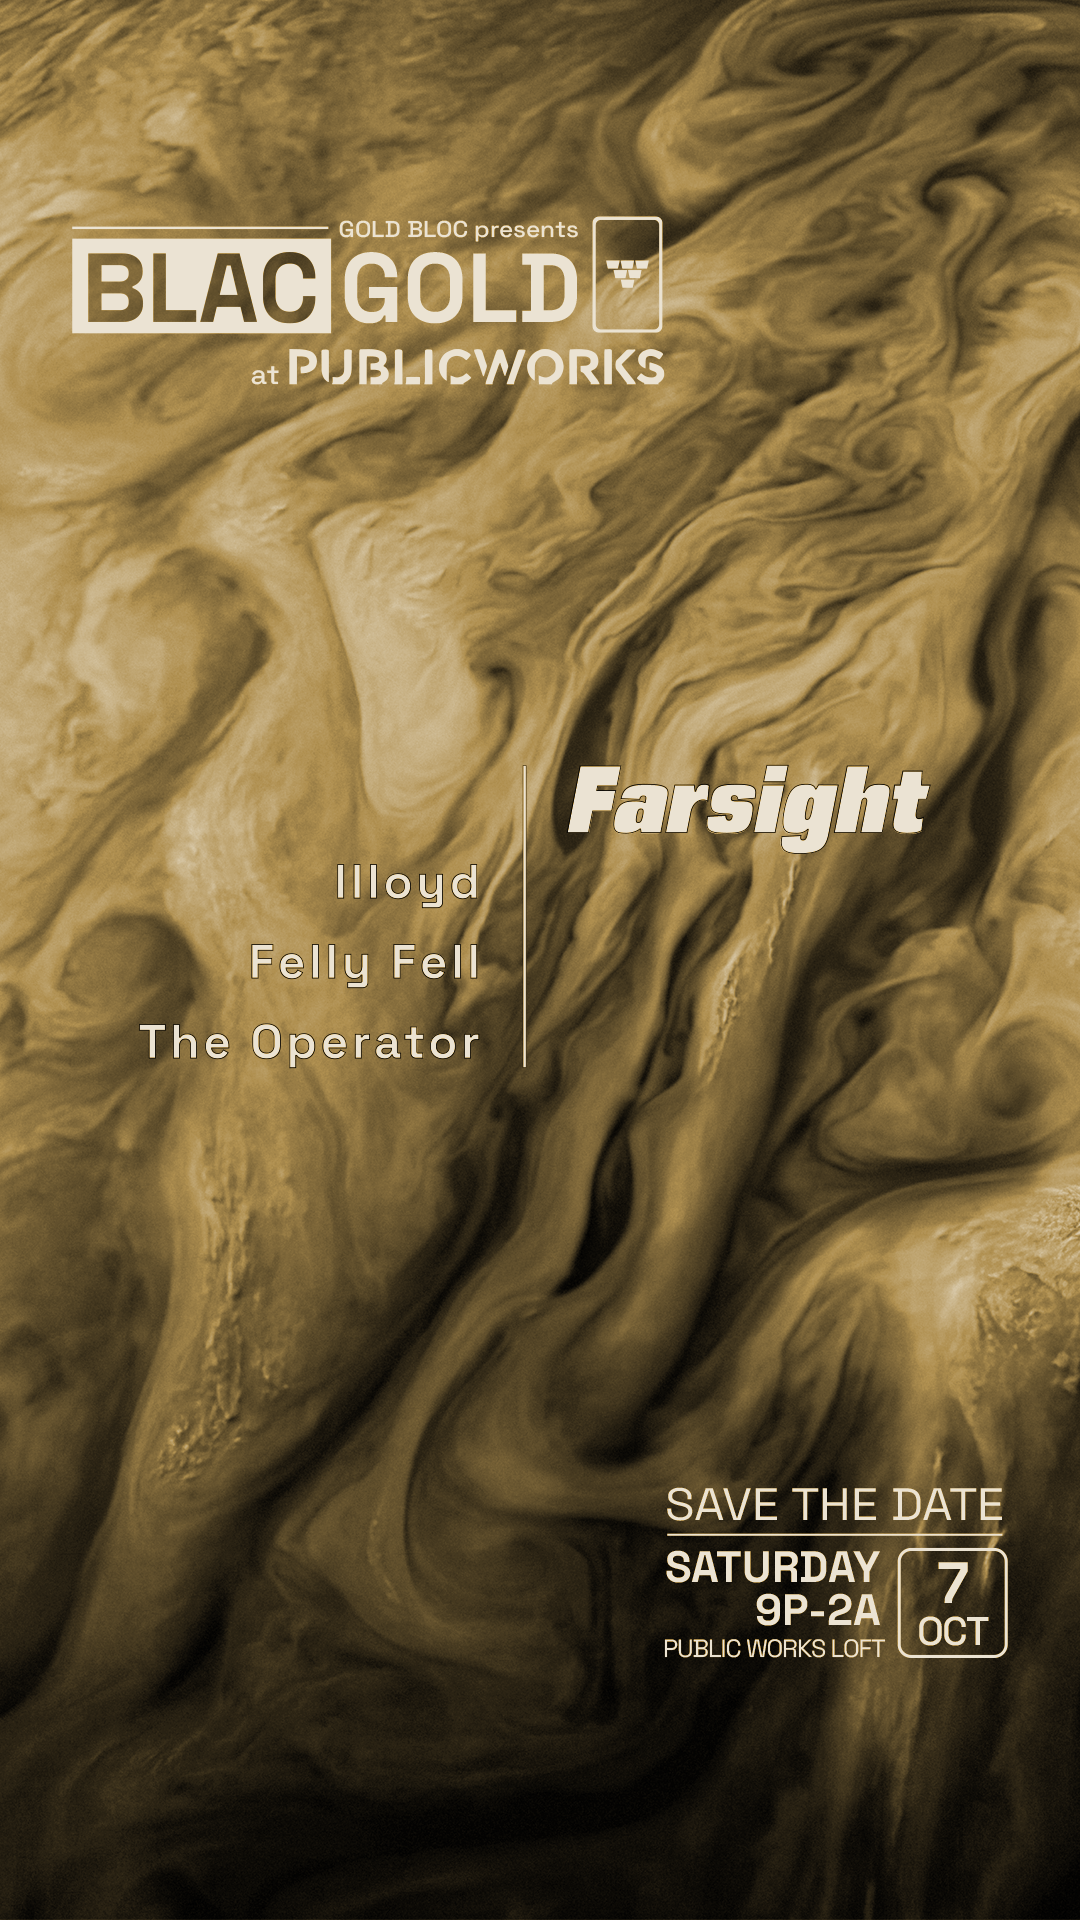 Blac Gold with Farsight, Felly Fell, llloyd and The Operator - Página frontal